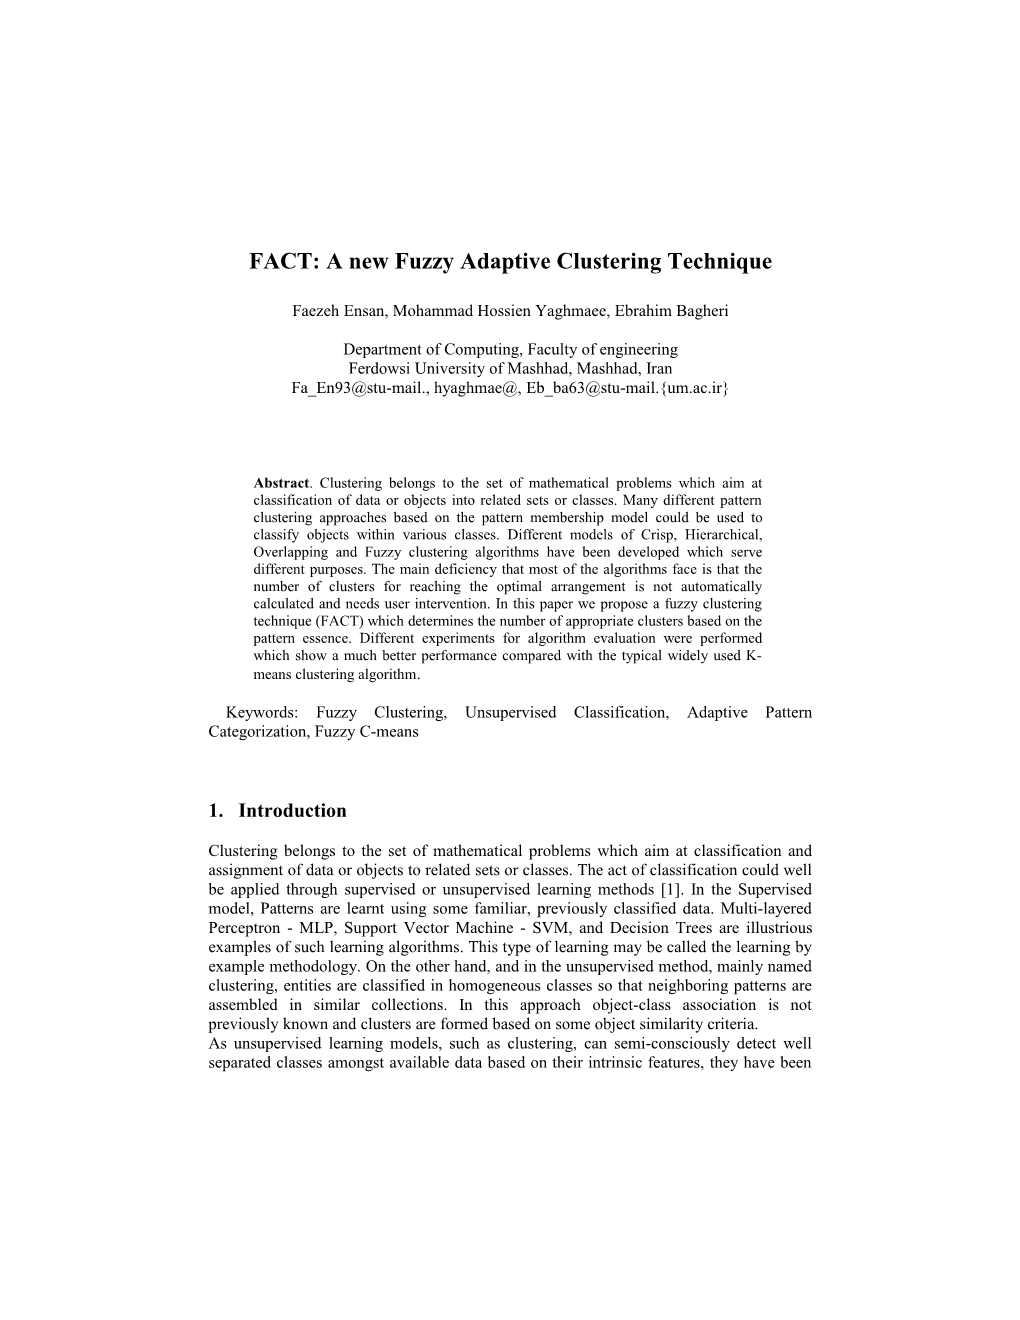 Clustering Belongs to the Set of Mathematical Problems Which Aim at Classification And